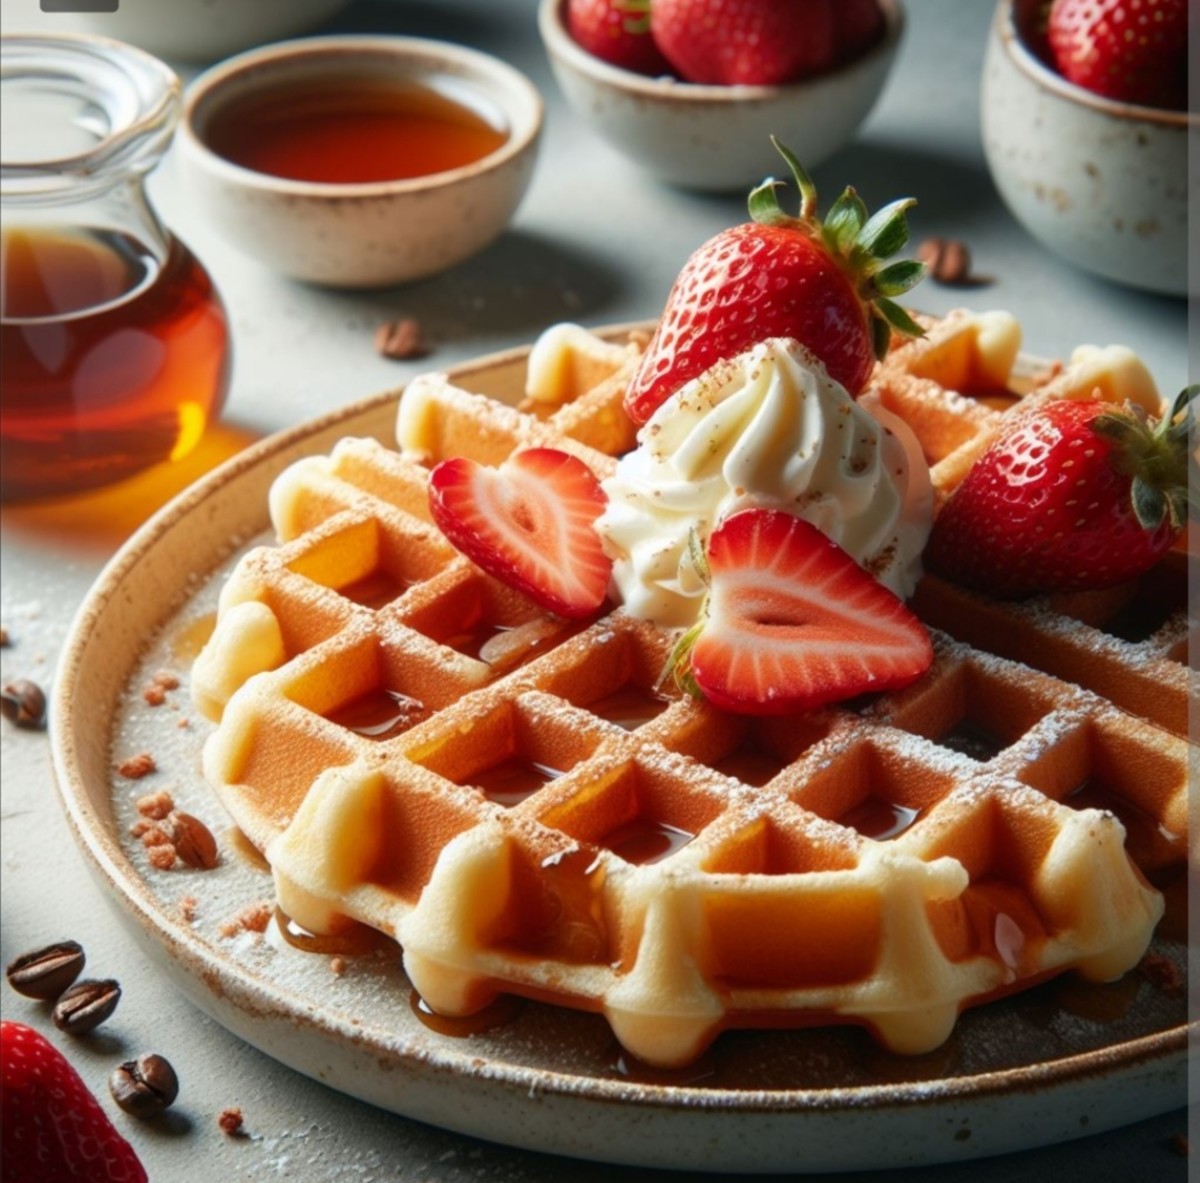 How to Make Waffles Batter and Waffle Mix Step by Step Guide - HubPages